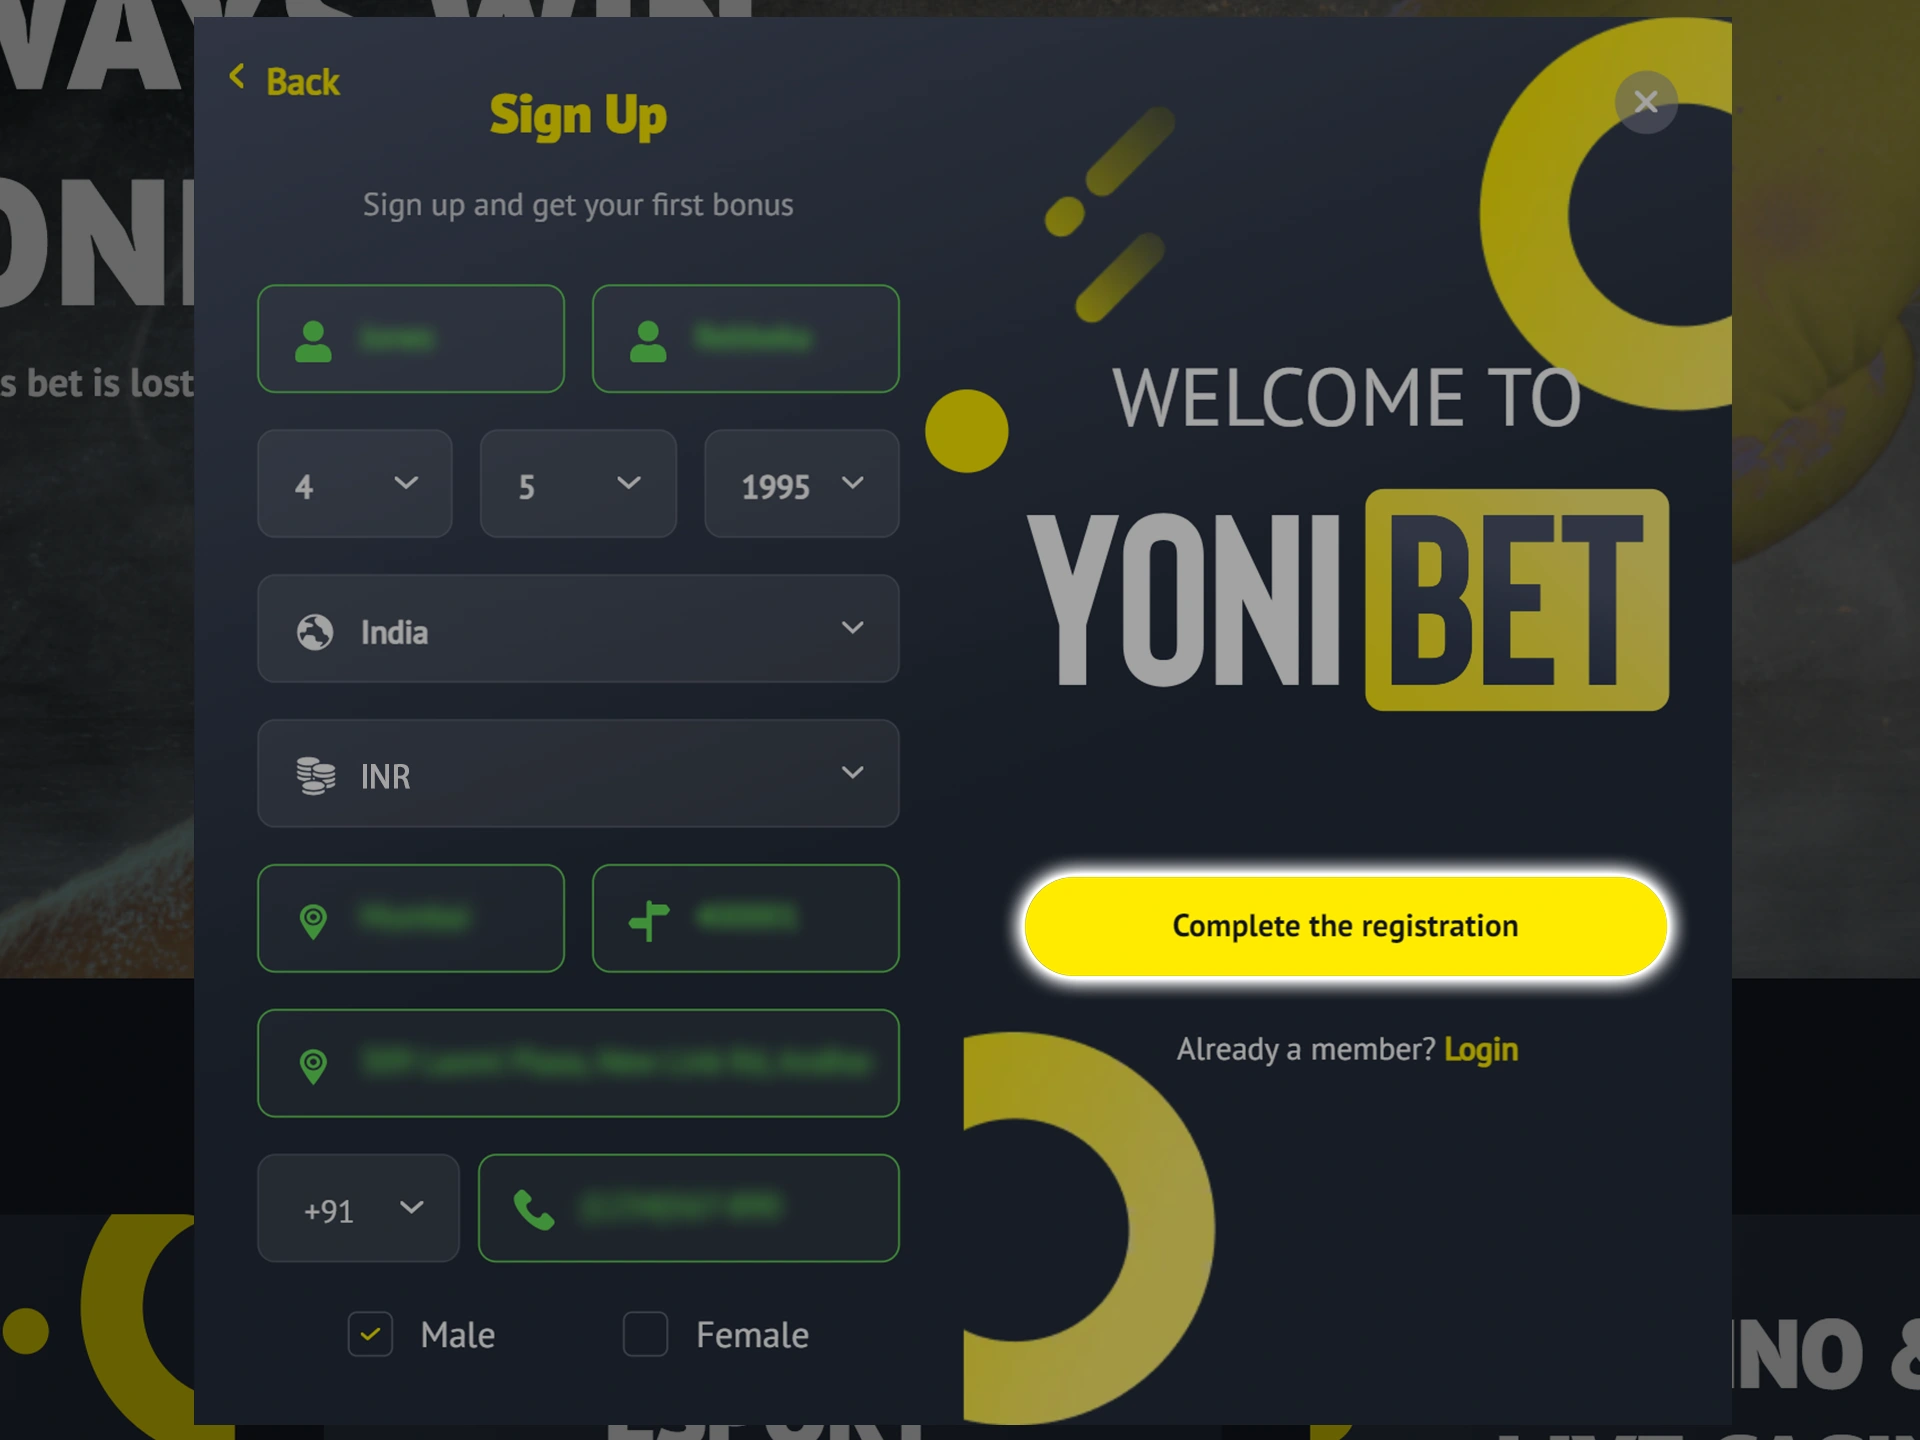 Click on the button to confirm registration on the Yonibet website.